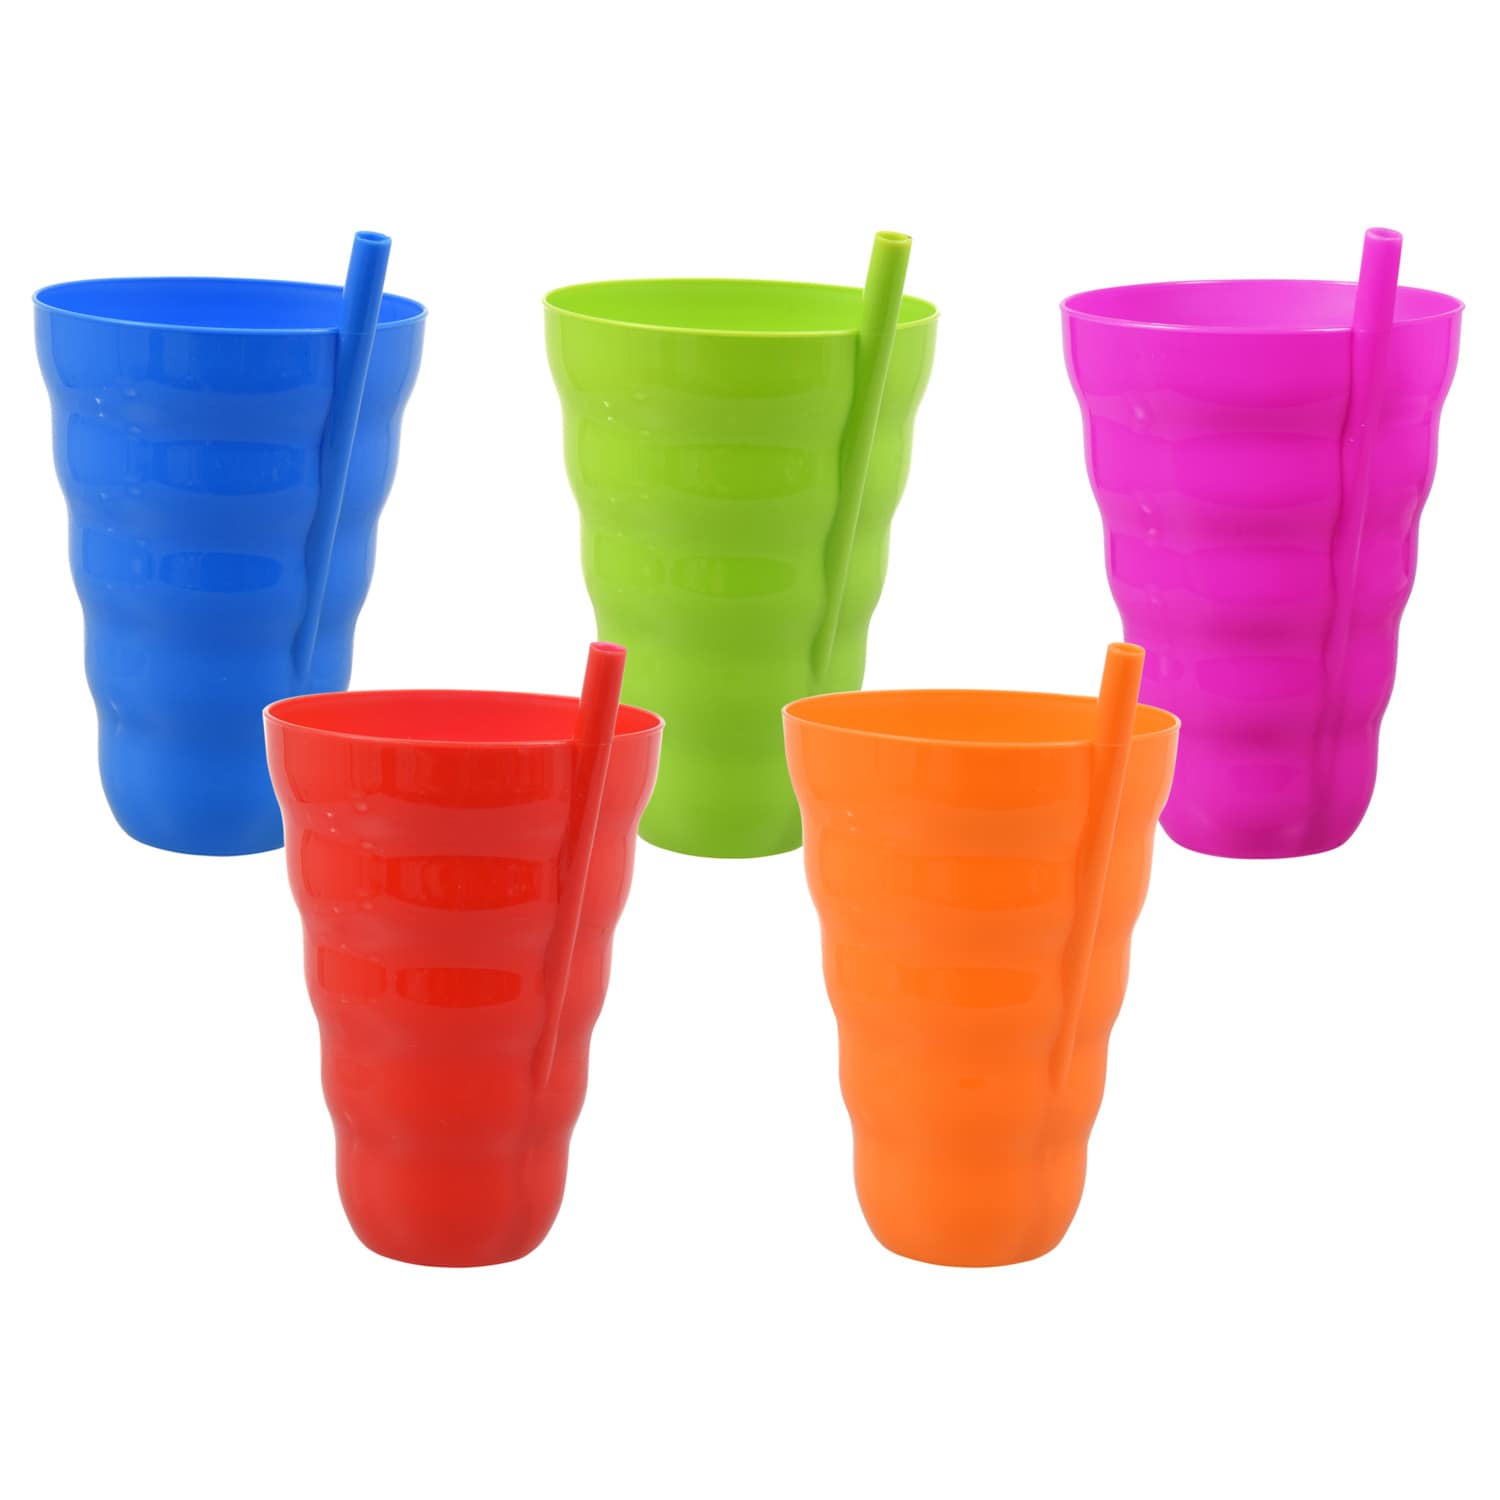 Bright & Fun Block Colour Childrens Drinking Plastic Beakers Cups with Straw Set of 4 